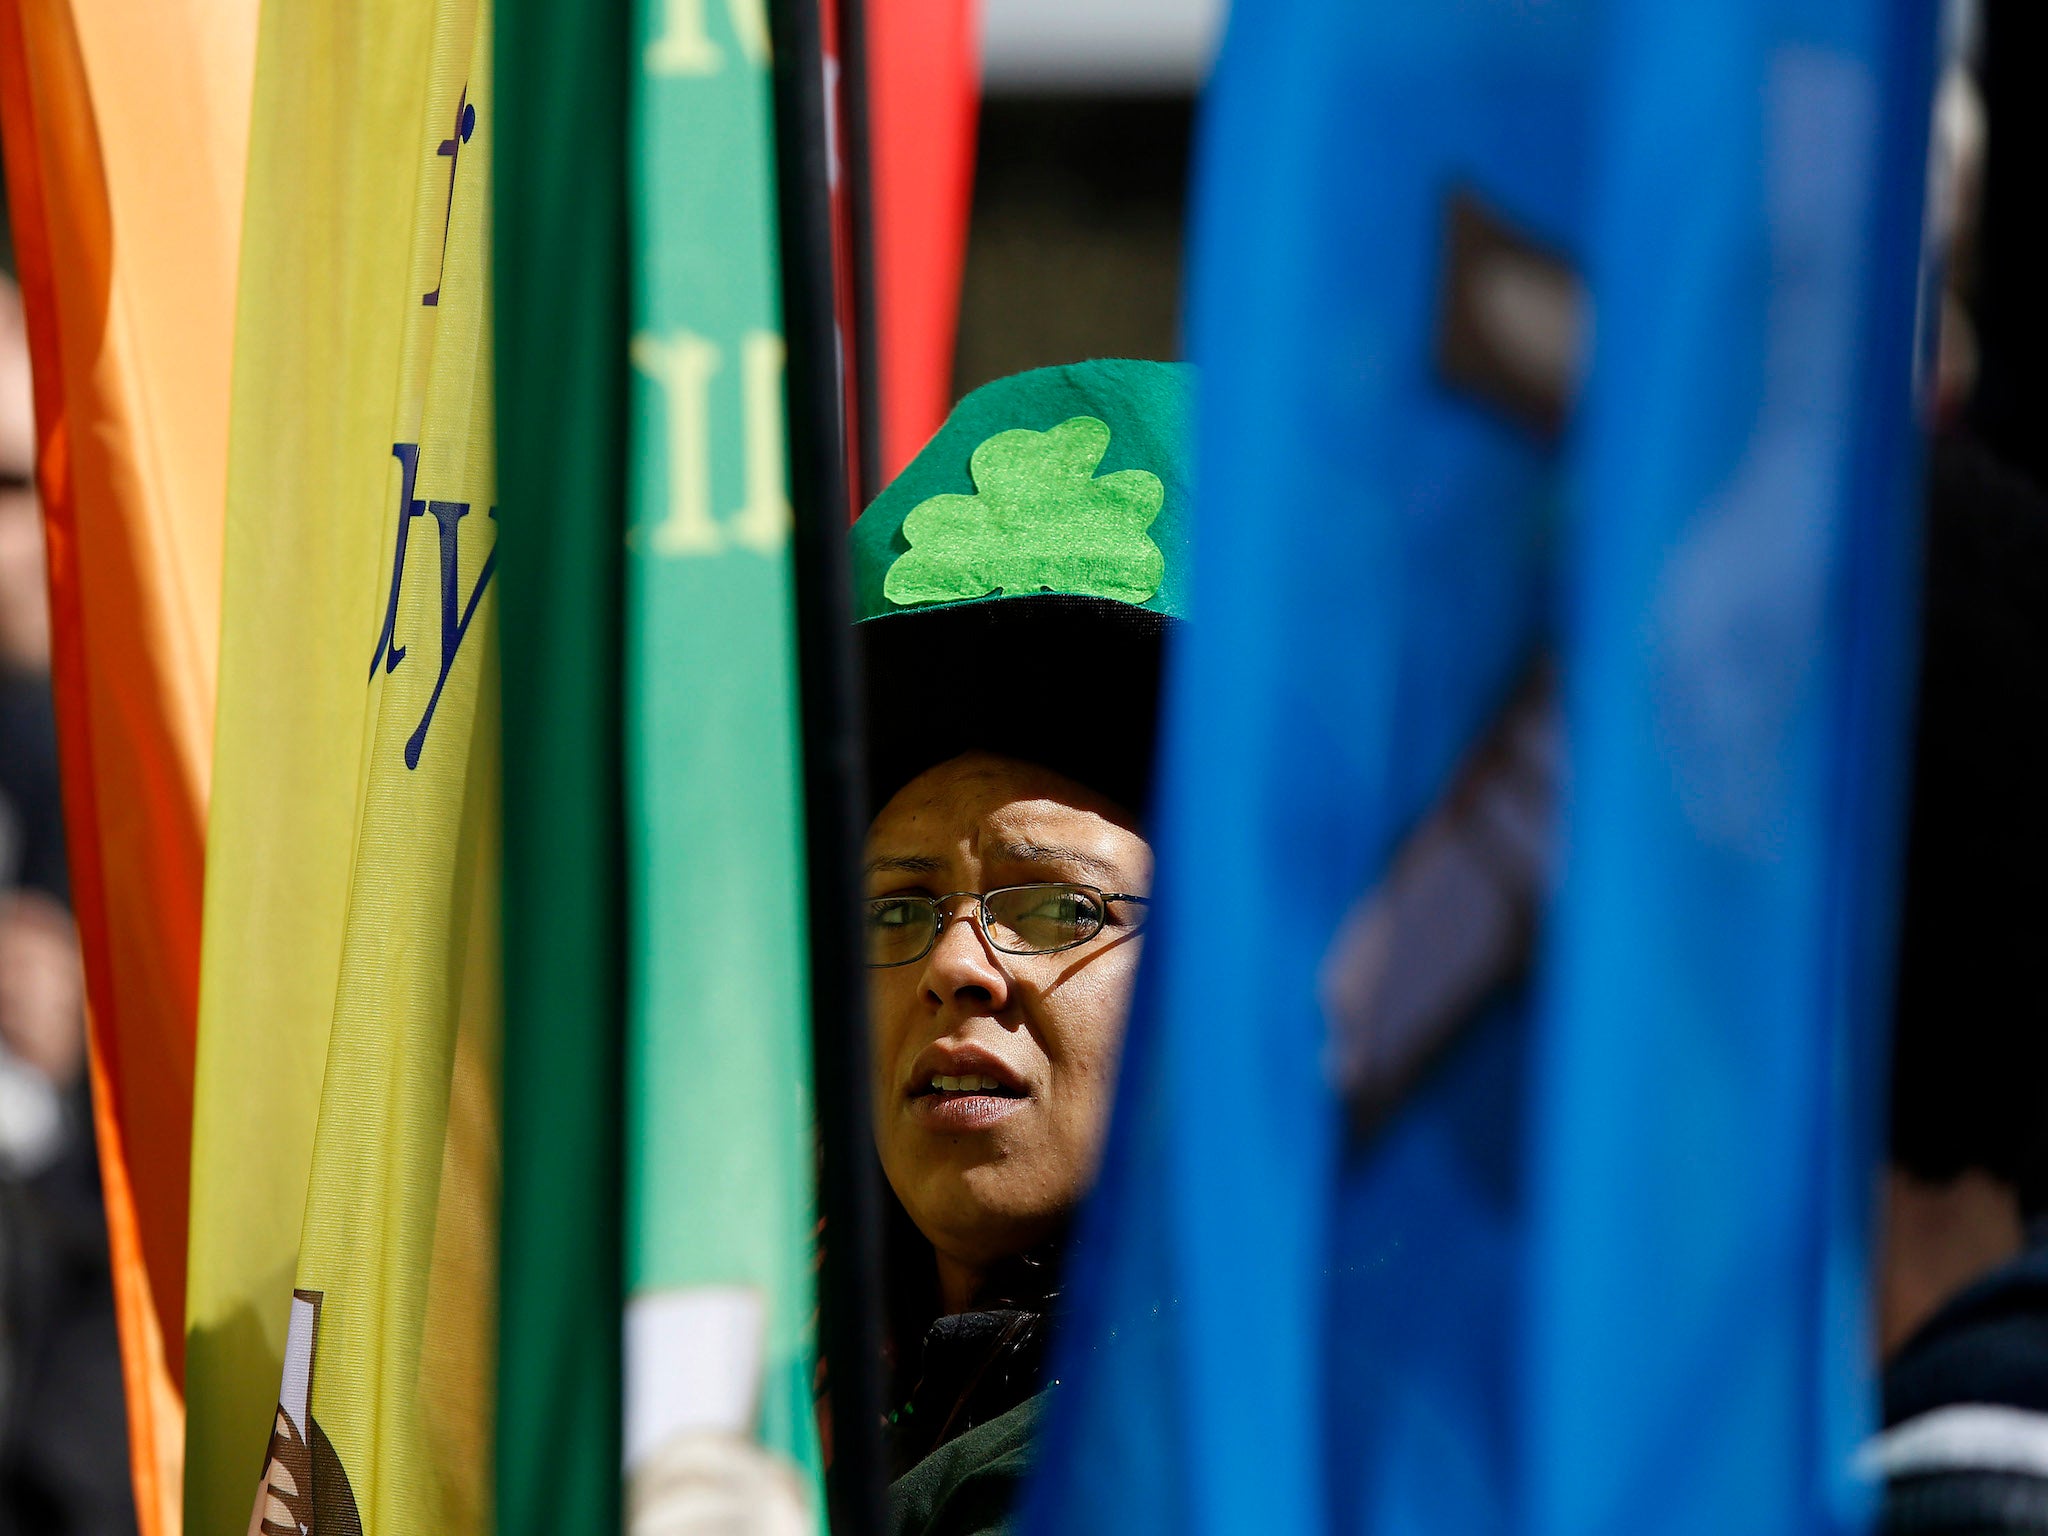 Gay marchers have joined Boston's St Patrick's Day Parade for the first time